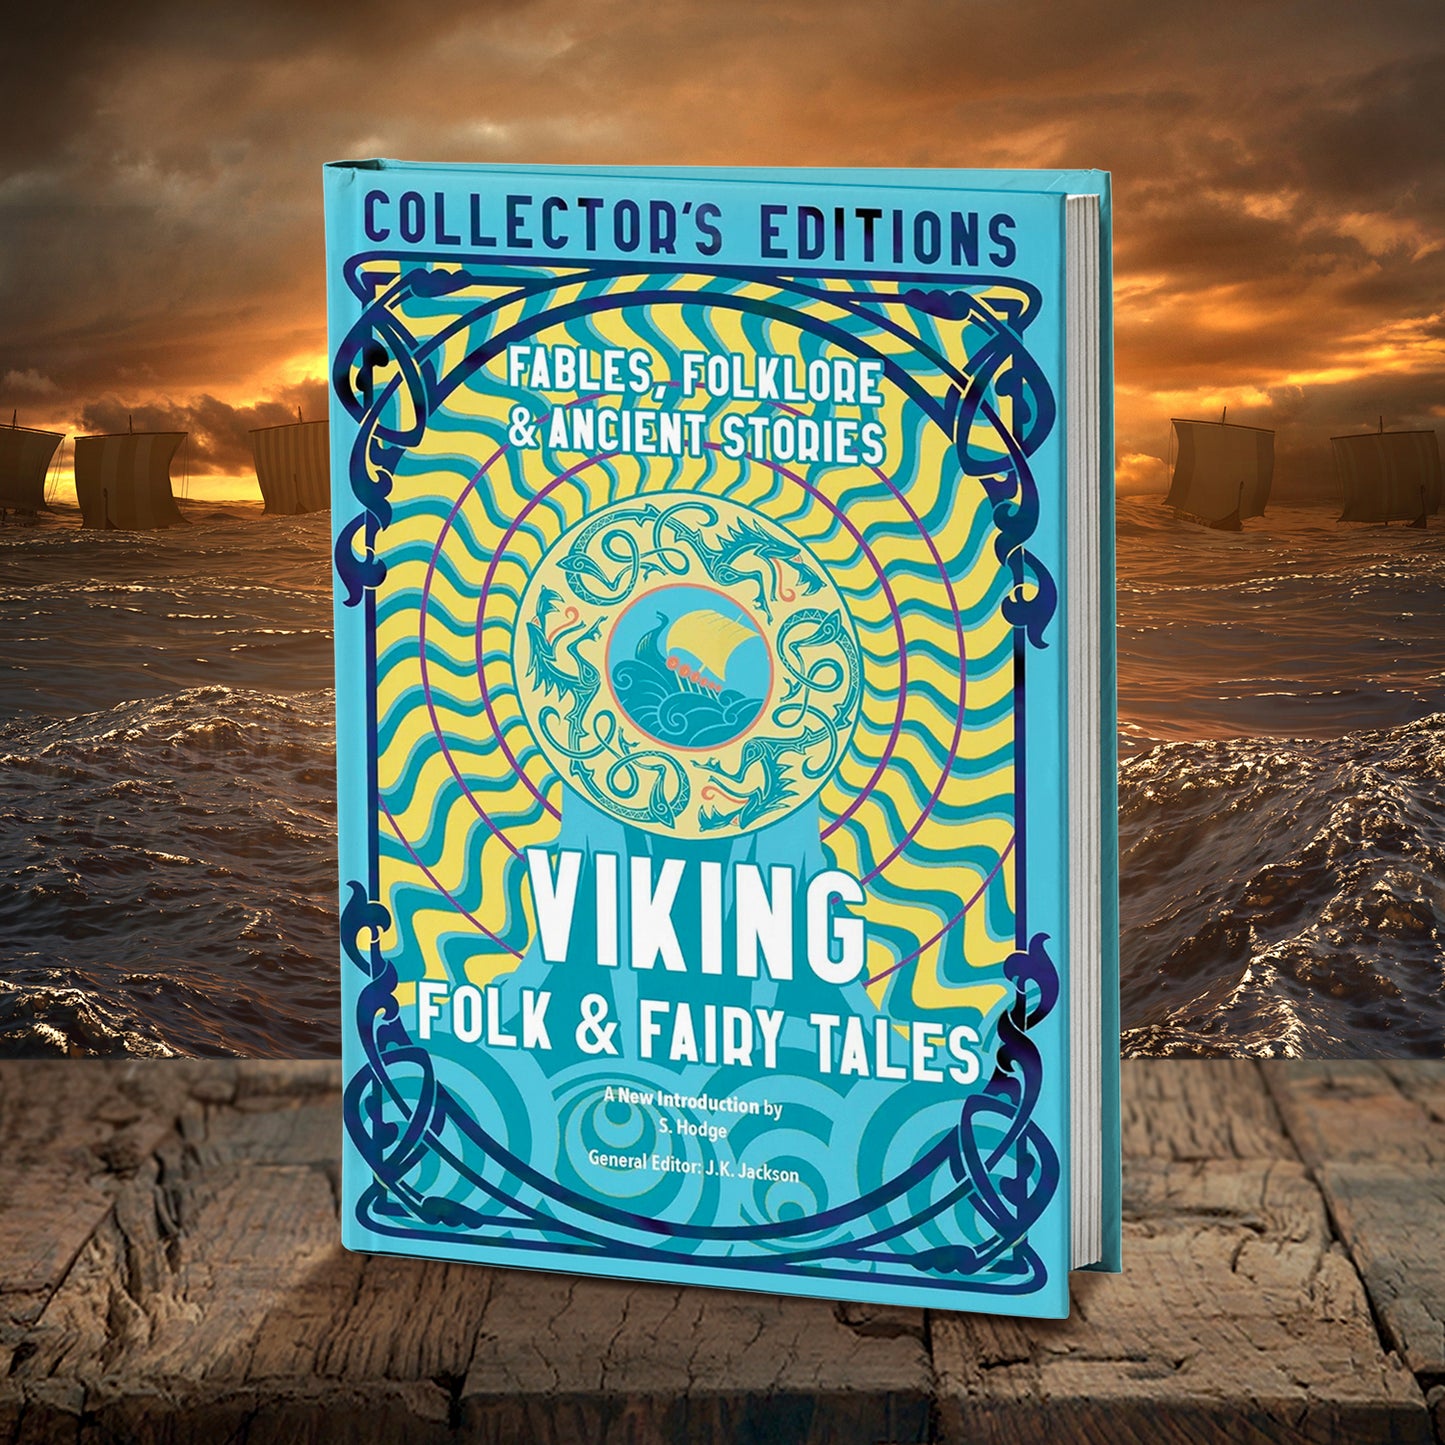 A blue and yellow book on a wood table. At the top is dark blue text saying "collector's editions." Under the text is a yellow and blue nordic drawing of a ship on the water, encircled by sea serpents and wavy blue and yellow lines. White text says "viking folk & fairy tales." Behind the book is the open ocean under an orange sky, with Viking boats at full sail.